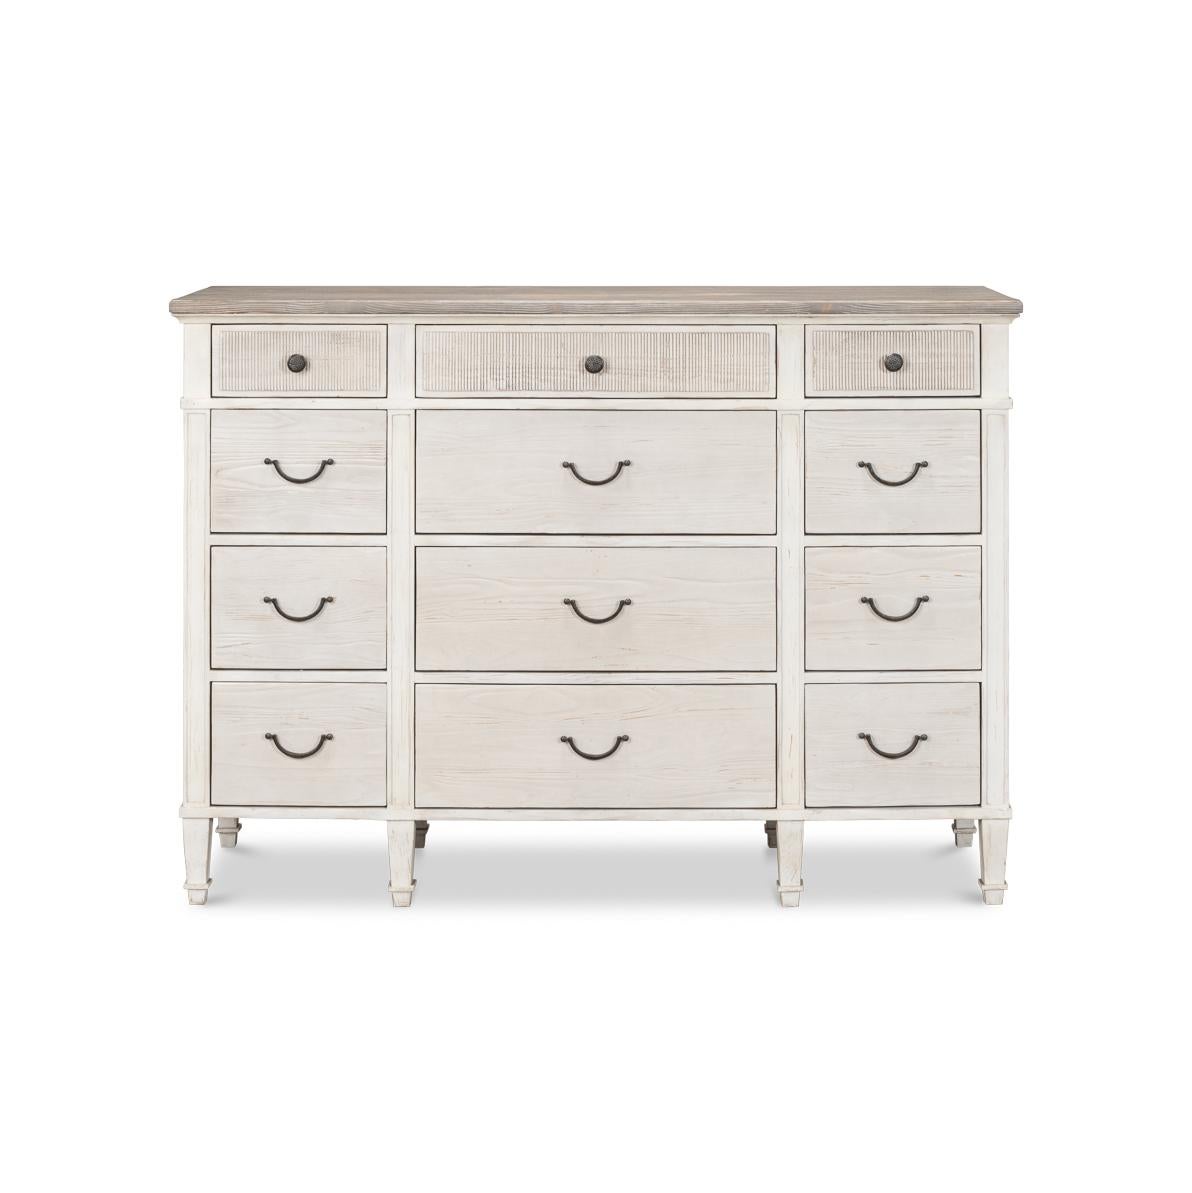 This dresser is meticulously crafted to embody the essence of a seaside retreat with its light, weathered finish and classic clean lines.

With 12 graduated drawers and an abundance of storage that won't overwhelm your space. Made from beechwood, in